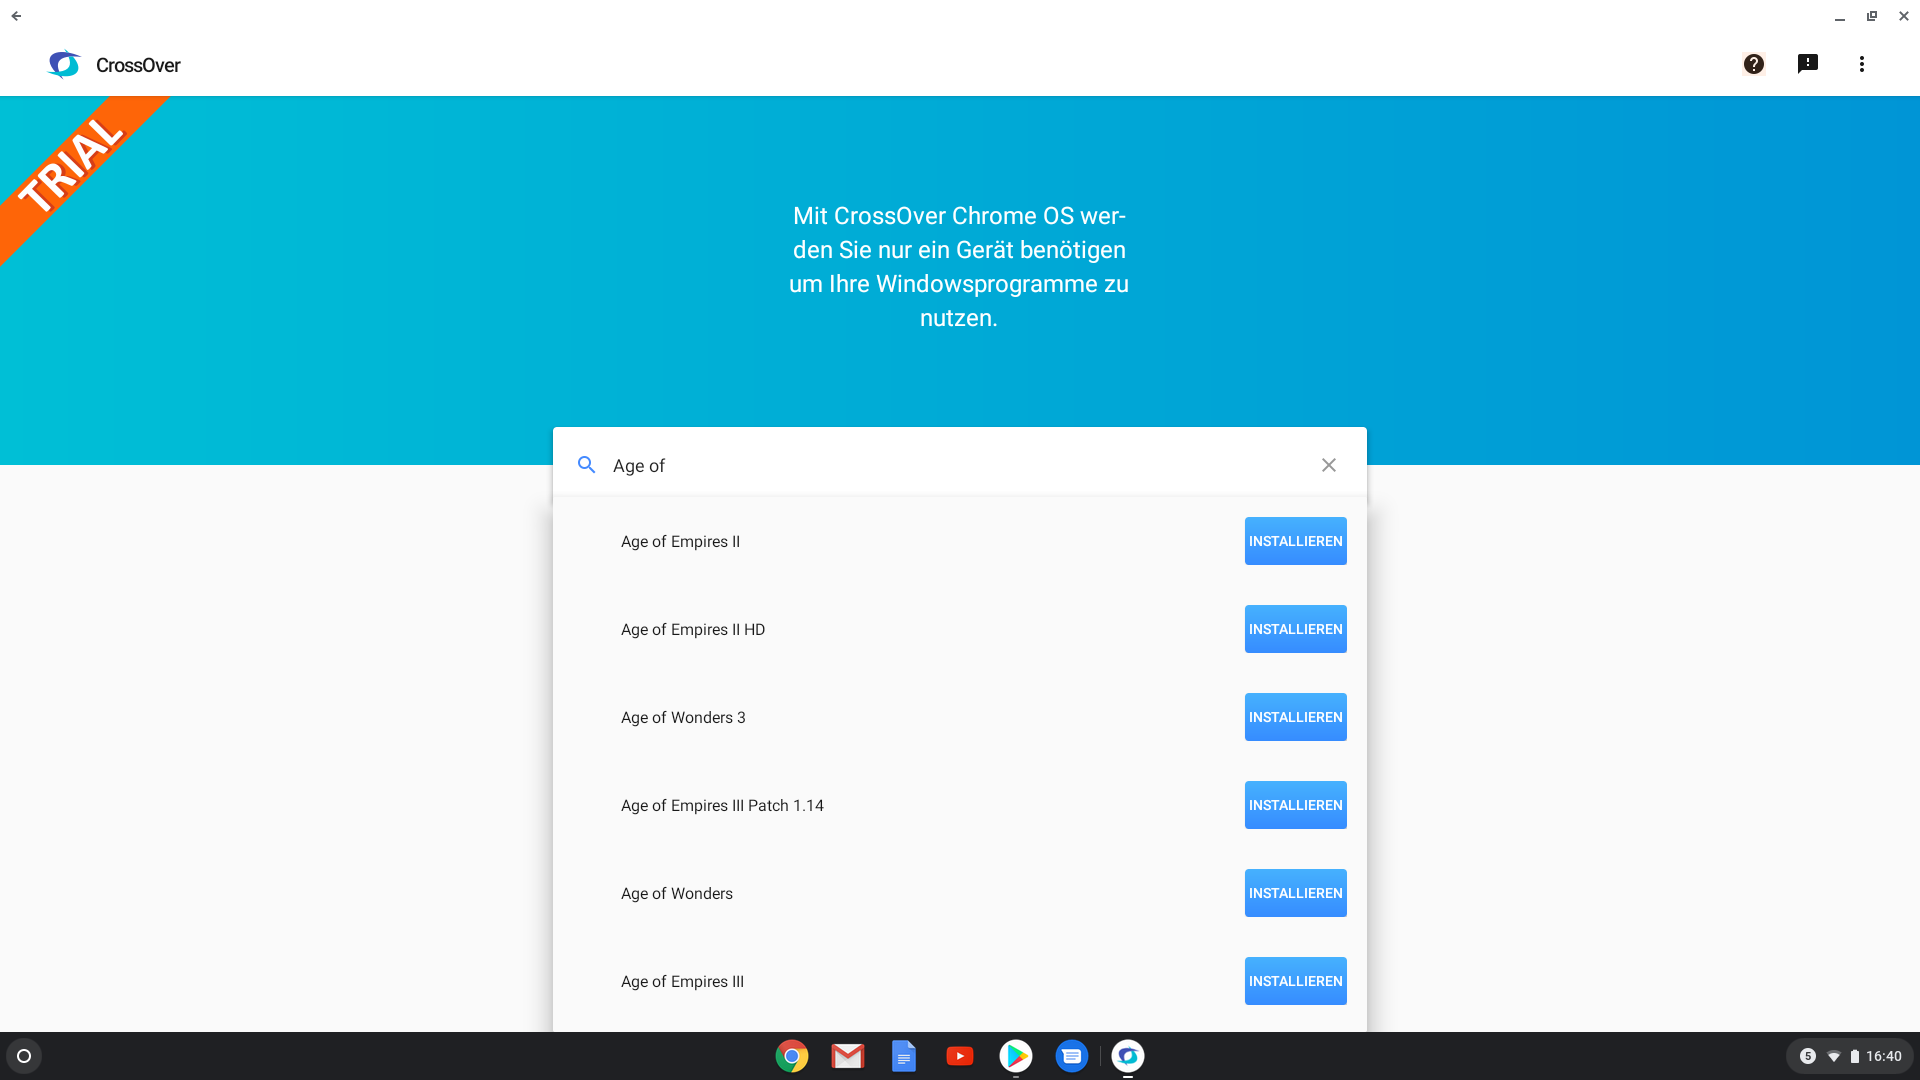 Chromebook: CrossOver Appauswahl